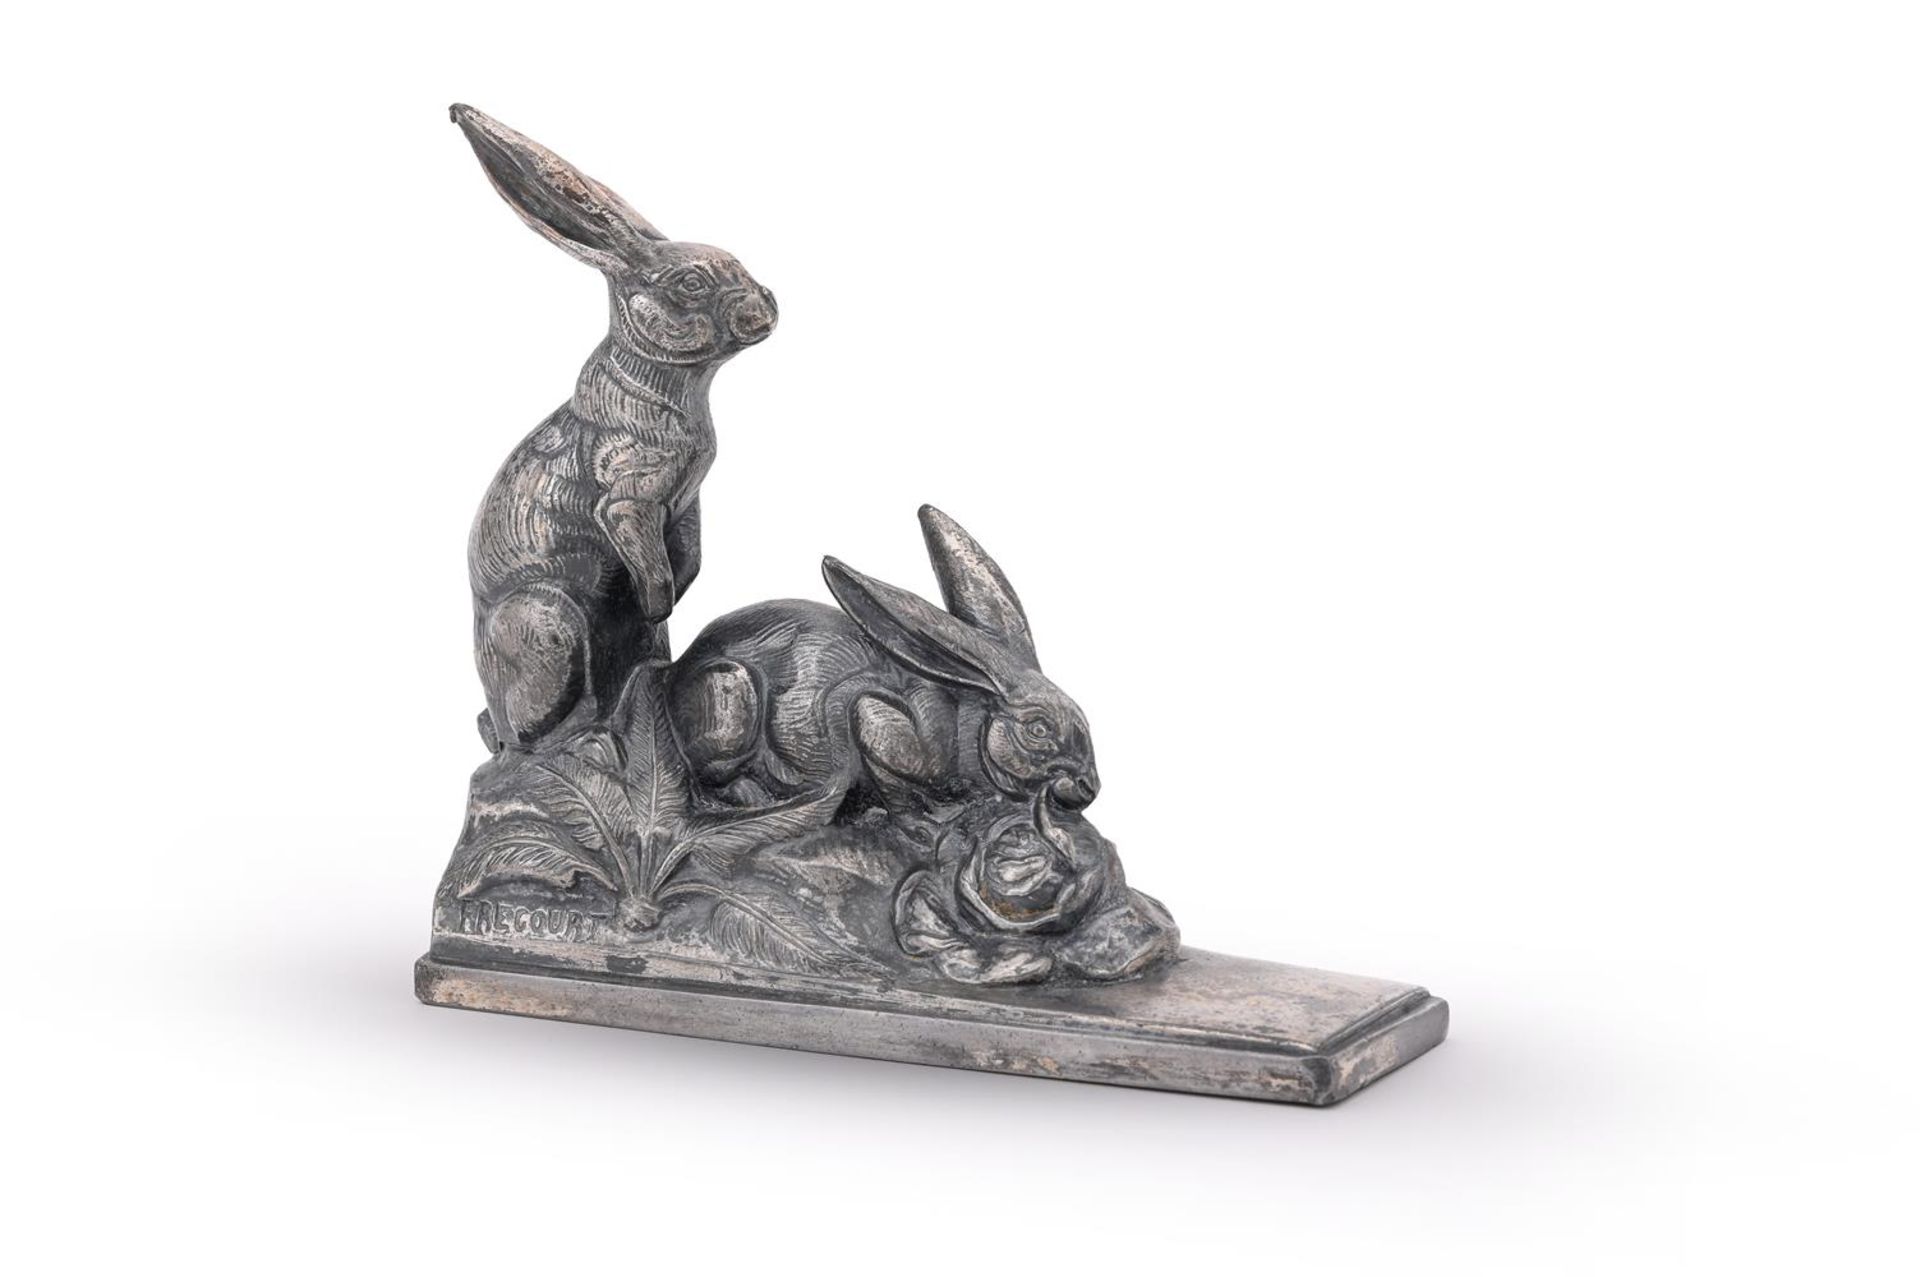 MAURICE FRECOURT (FRENCH, LATE 19TH/EARLY 20TH CENTURY), A SPELTER MODEL OF TWO RABBITS